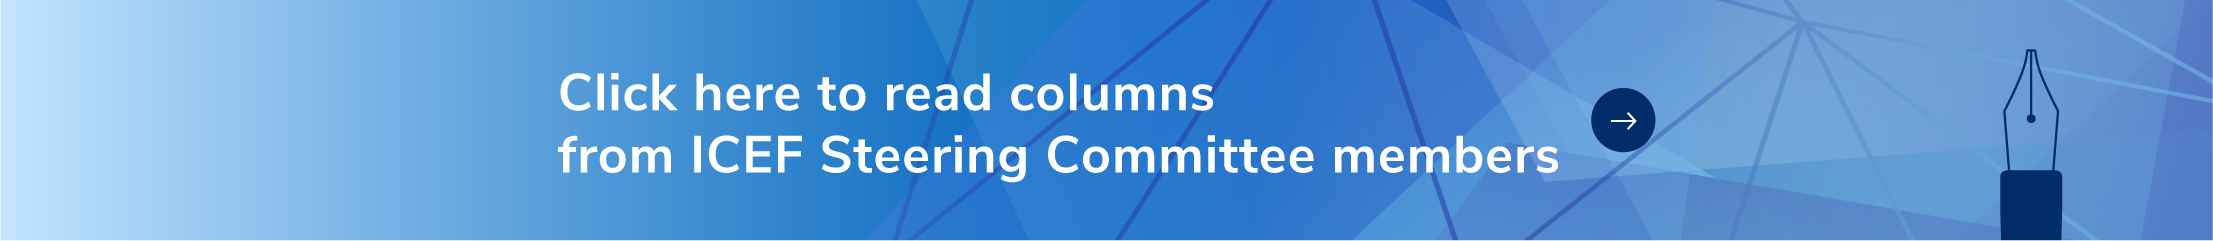 Click here to read columns from ICEF Steering Committee members